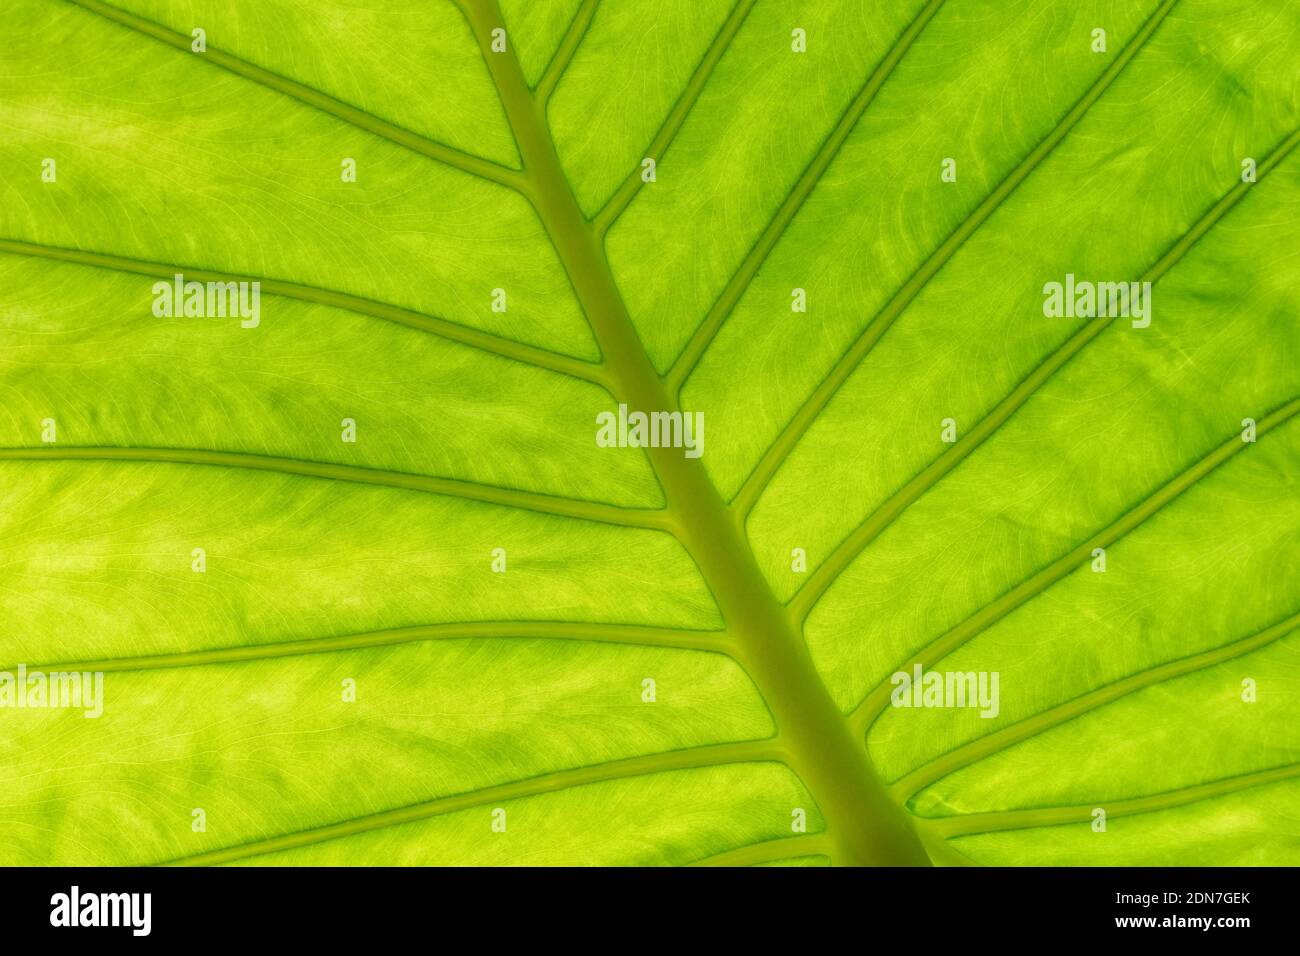 Back lighted green leaf, close up texture background Stock Photo